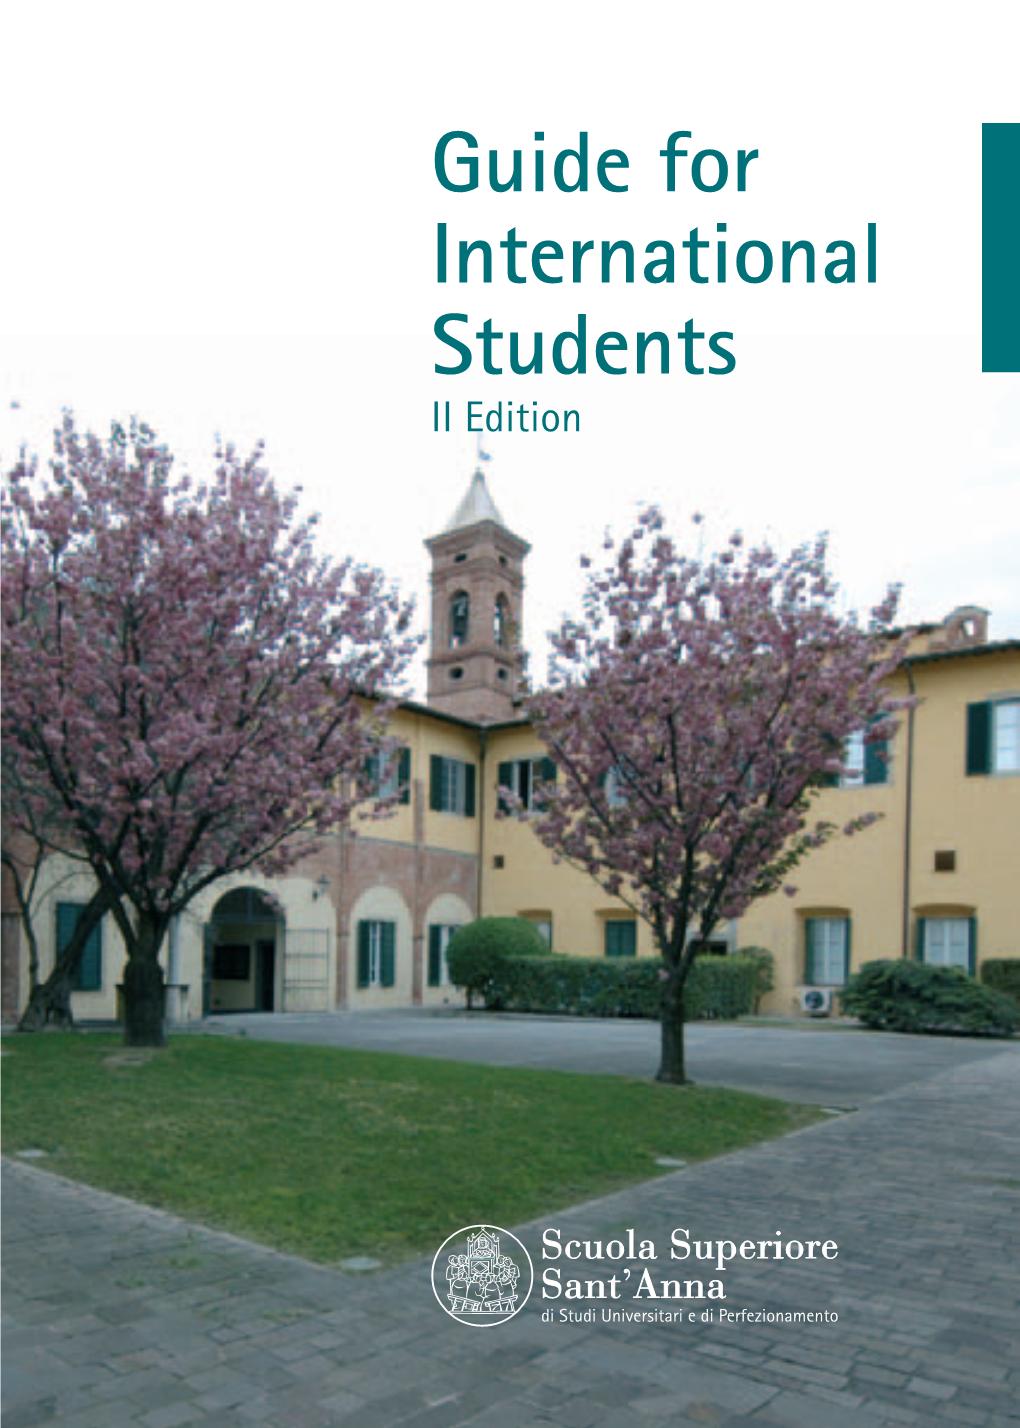 Guide for International Students II Edition CONTENTS Page